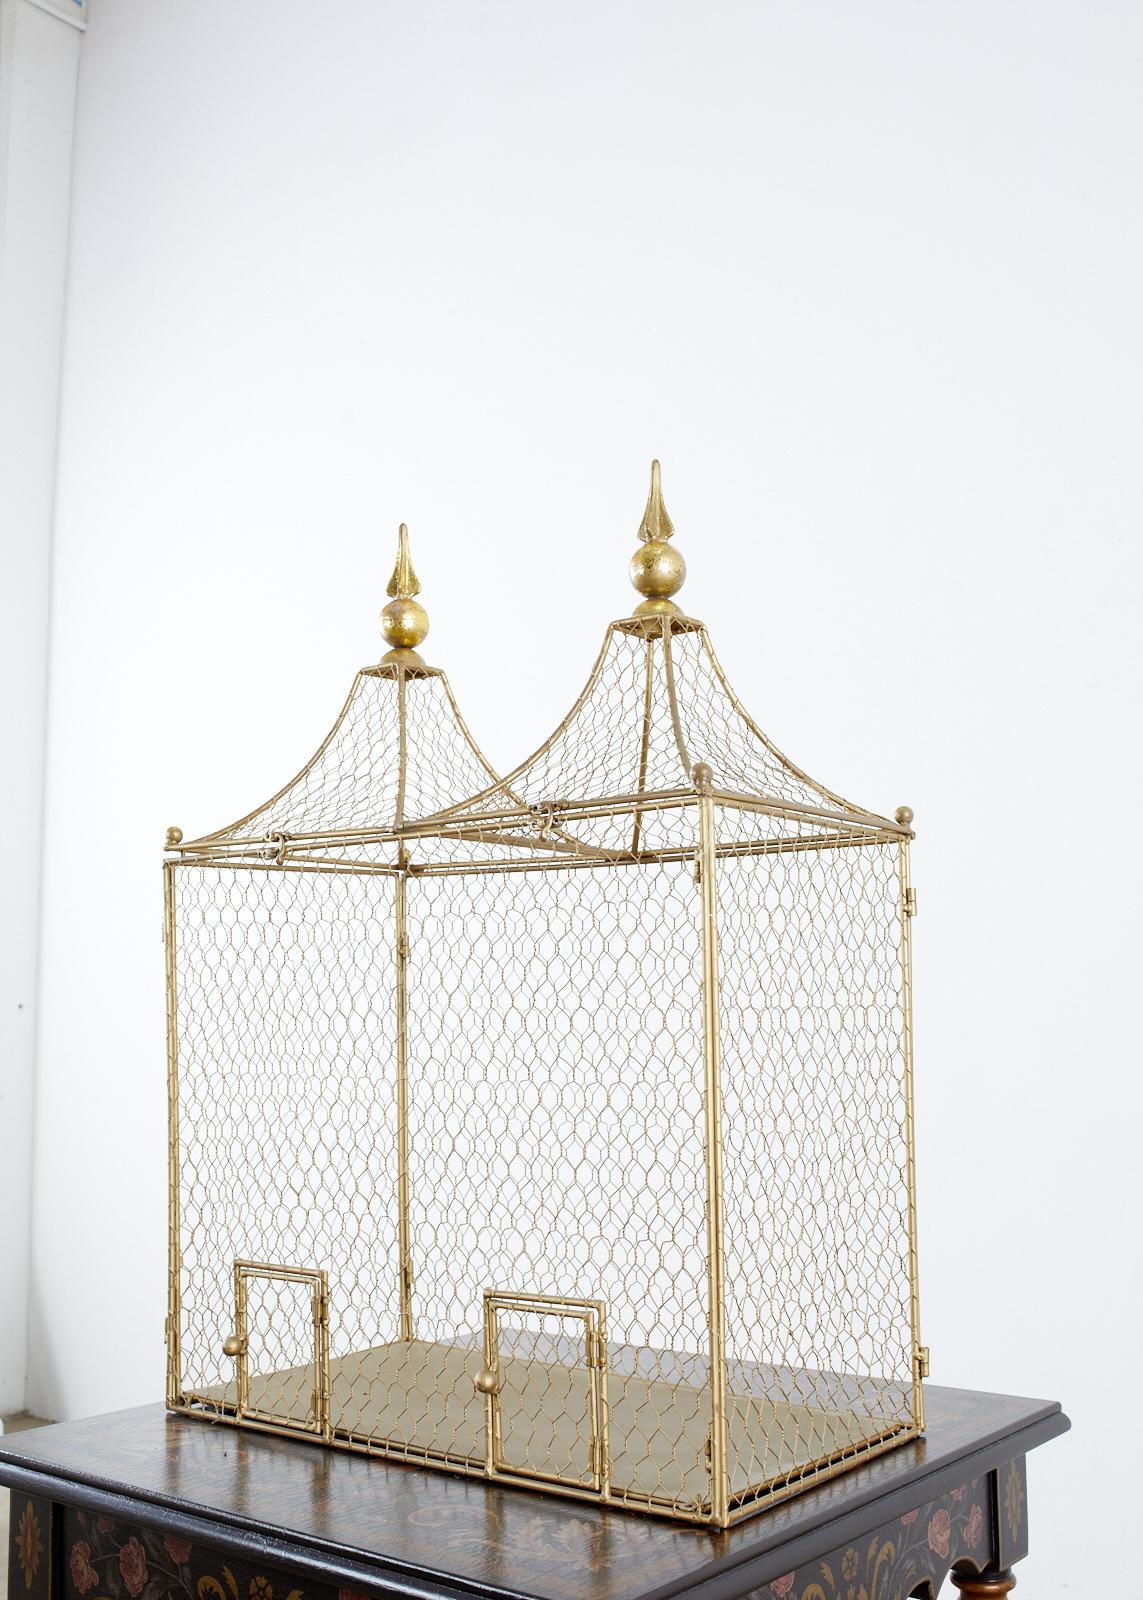 Distinctive metal and chicken wire bird cage featuring a gilt or gilded metal finish. Made in the French style with twin peaked roof that opens and topped with two large finials. Ball finials decorate each corner of the roof and the cage is fronted